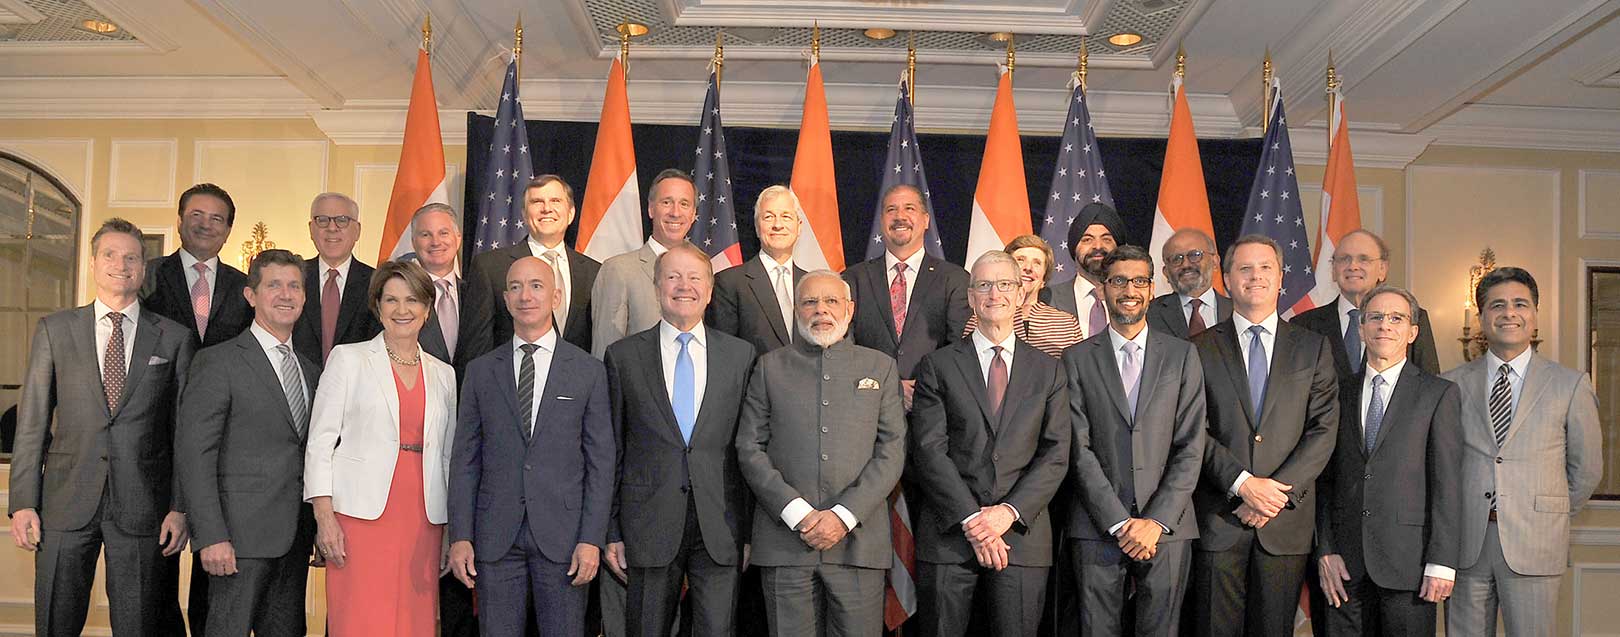 Top US CEOs commit to invest in India